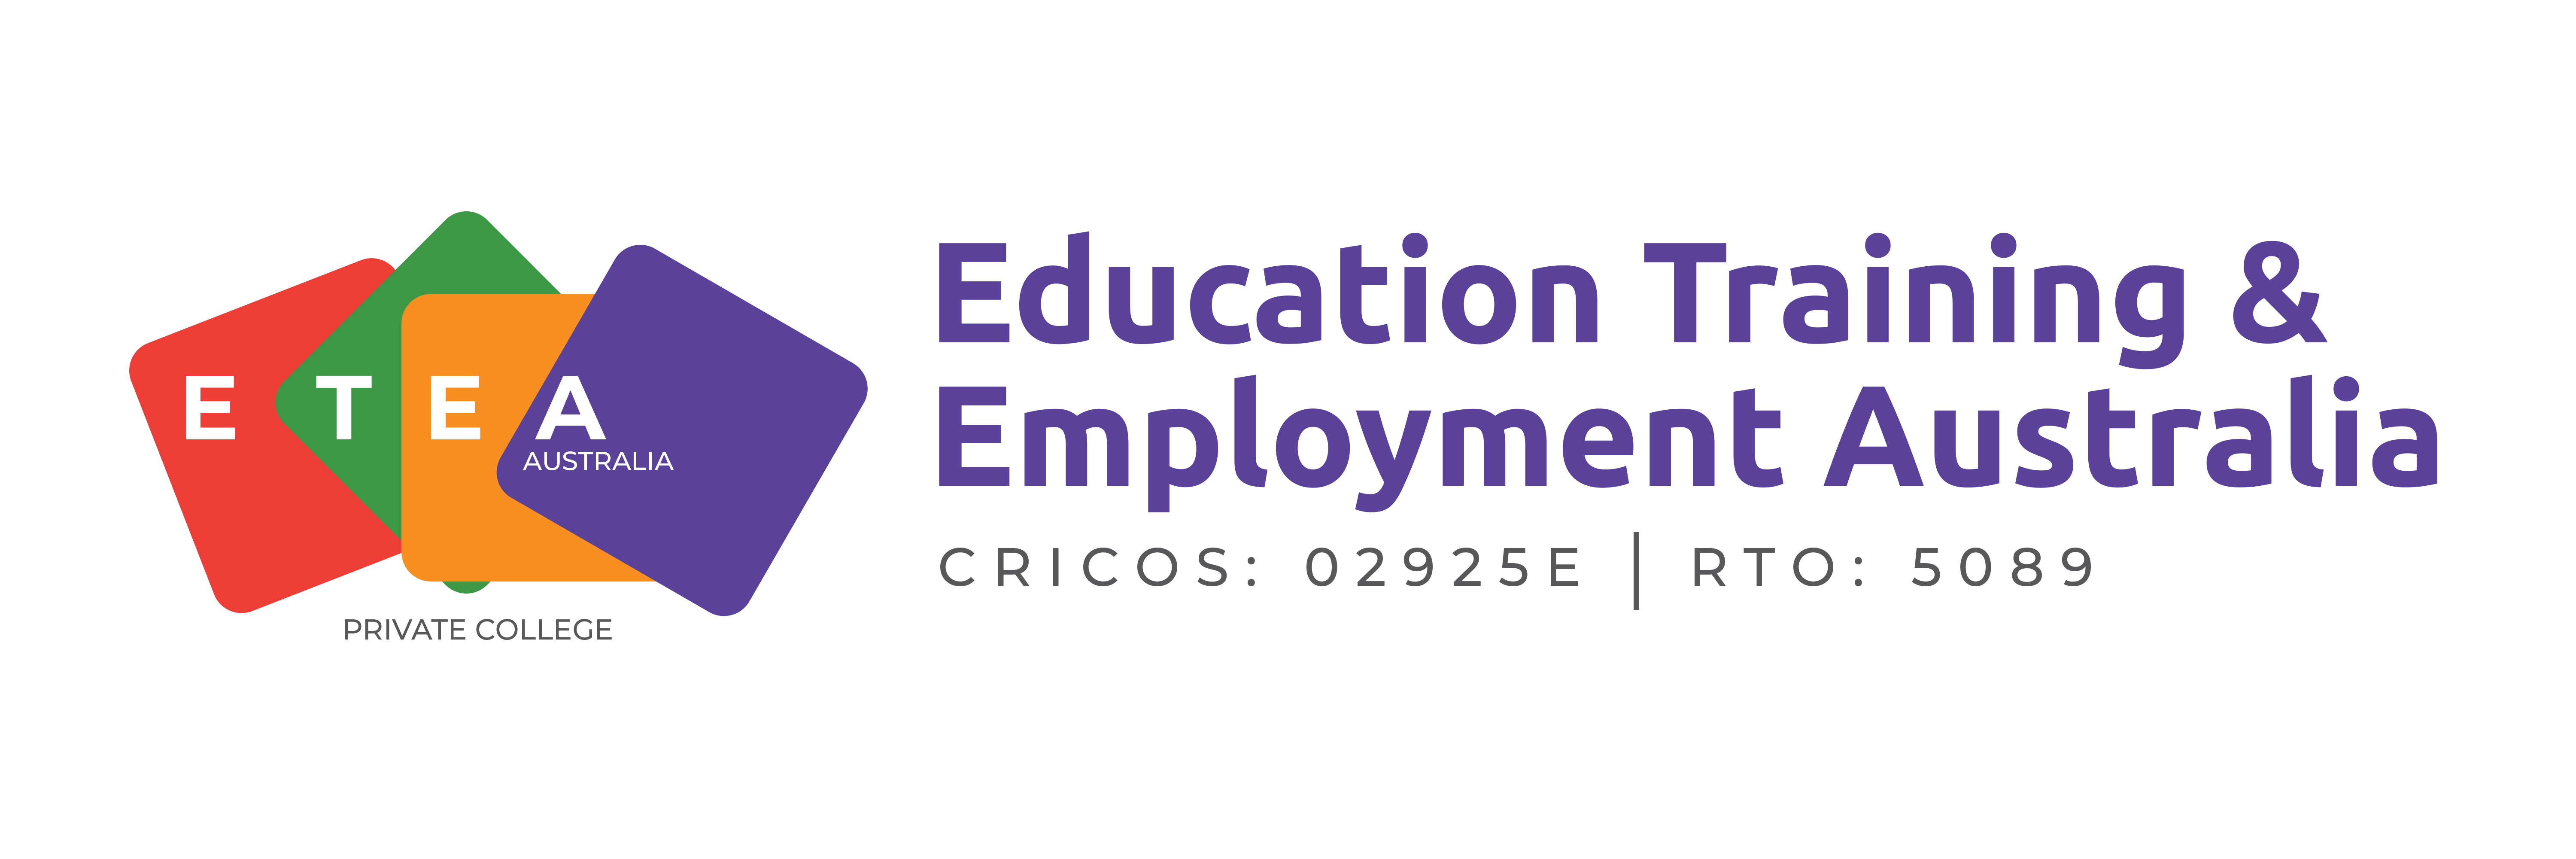 Mental Health Archives - Education Training and Employment Australia